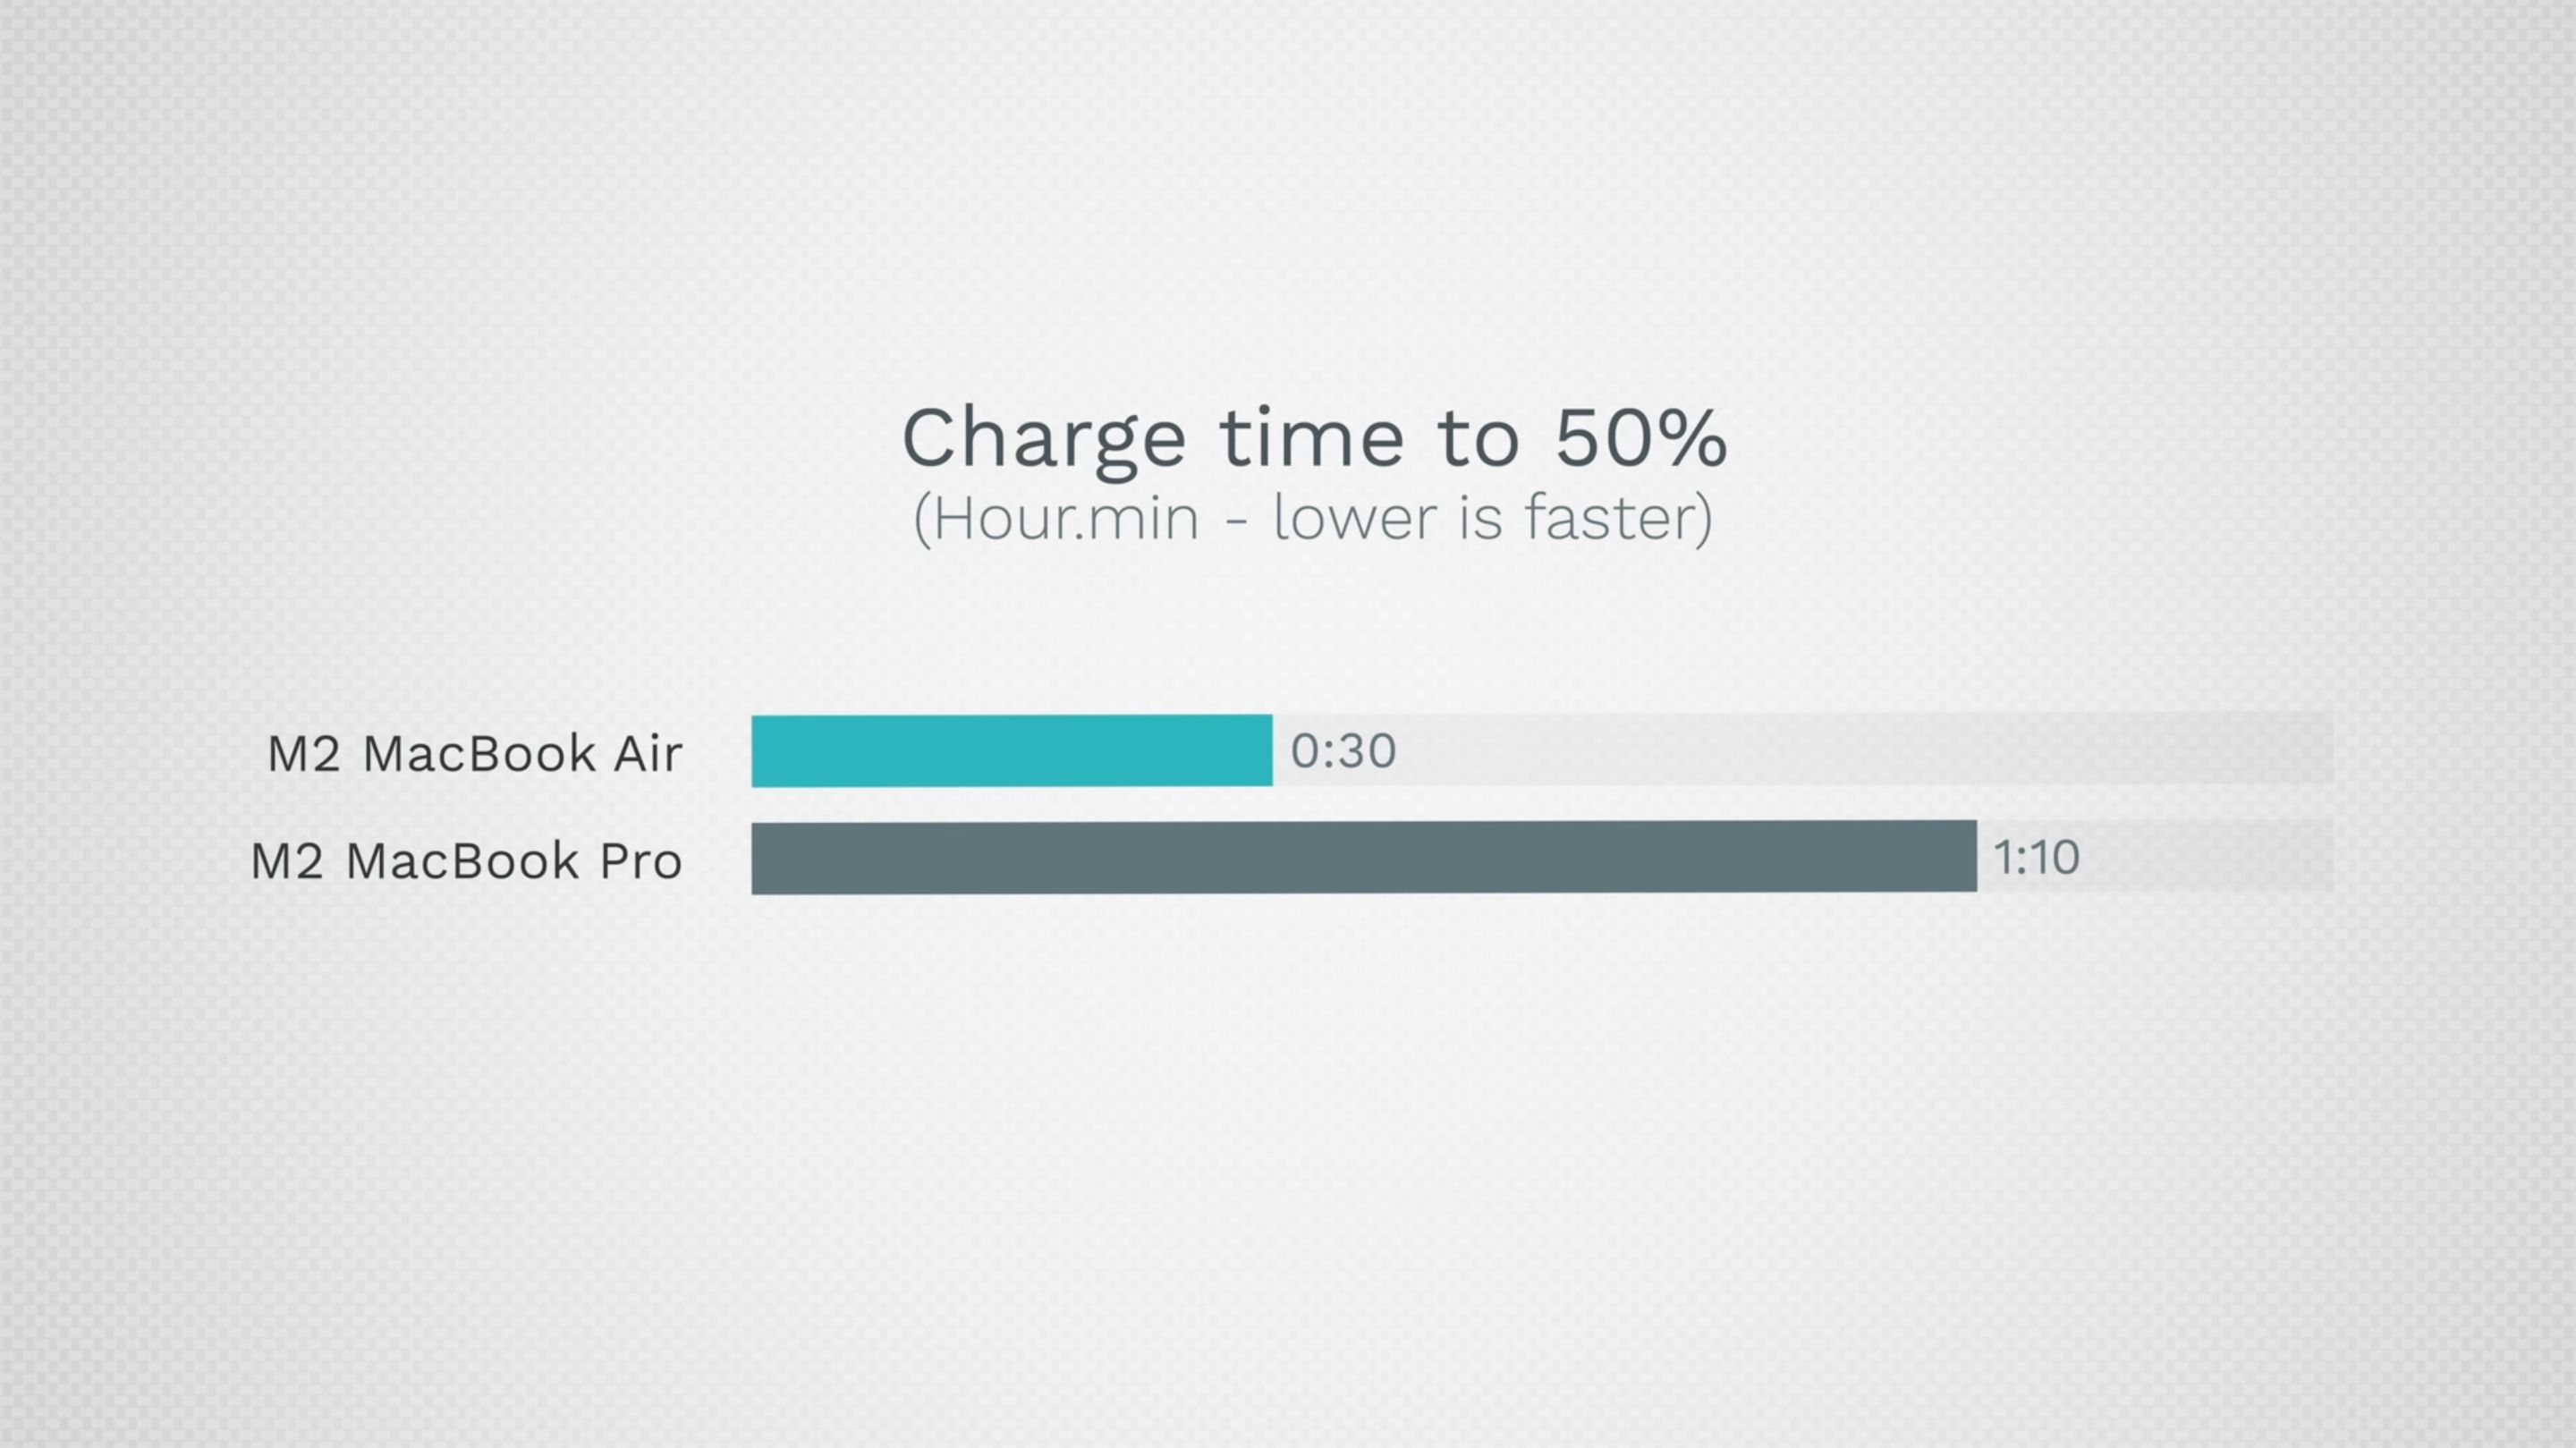 A comparison of the charging speeds between the M2 MacBook Pro and Air